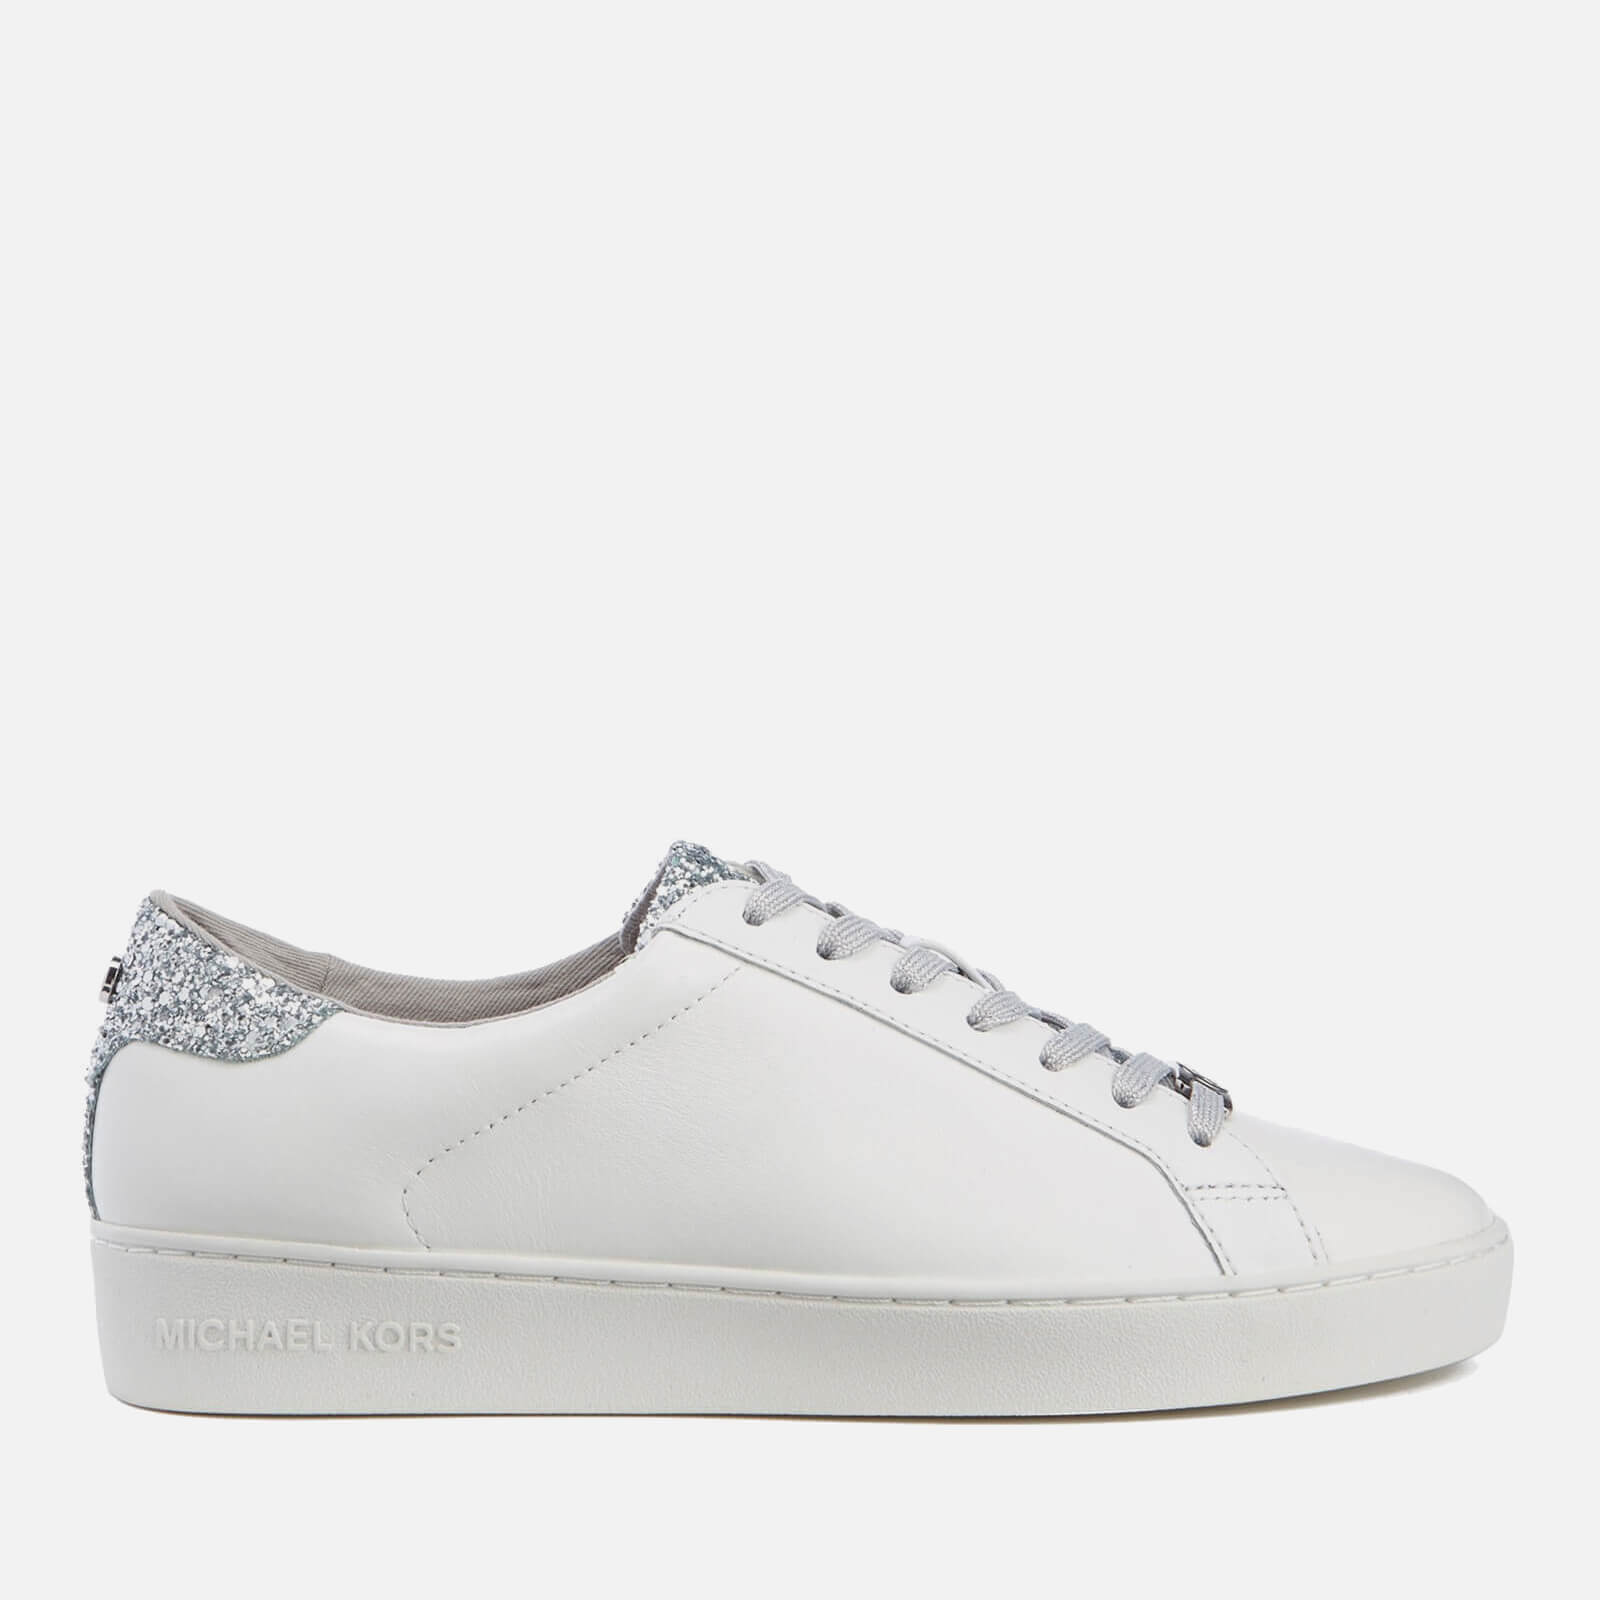 MICHAEL Michael Kors Women's Irving Lace Up Court Trainers - Optic White/Silver - UK 3/US 6